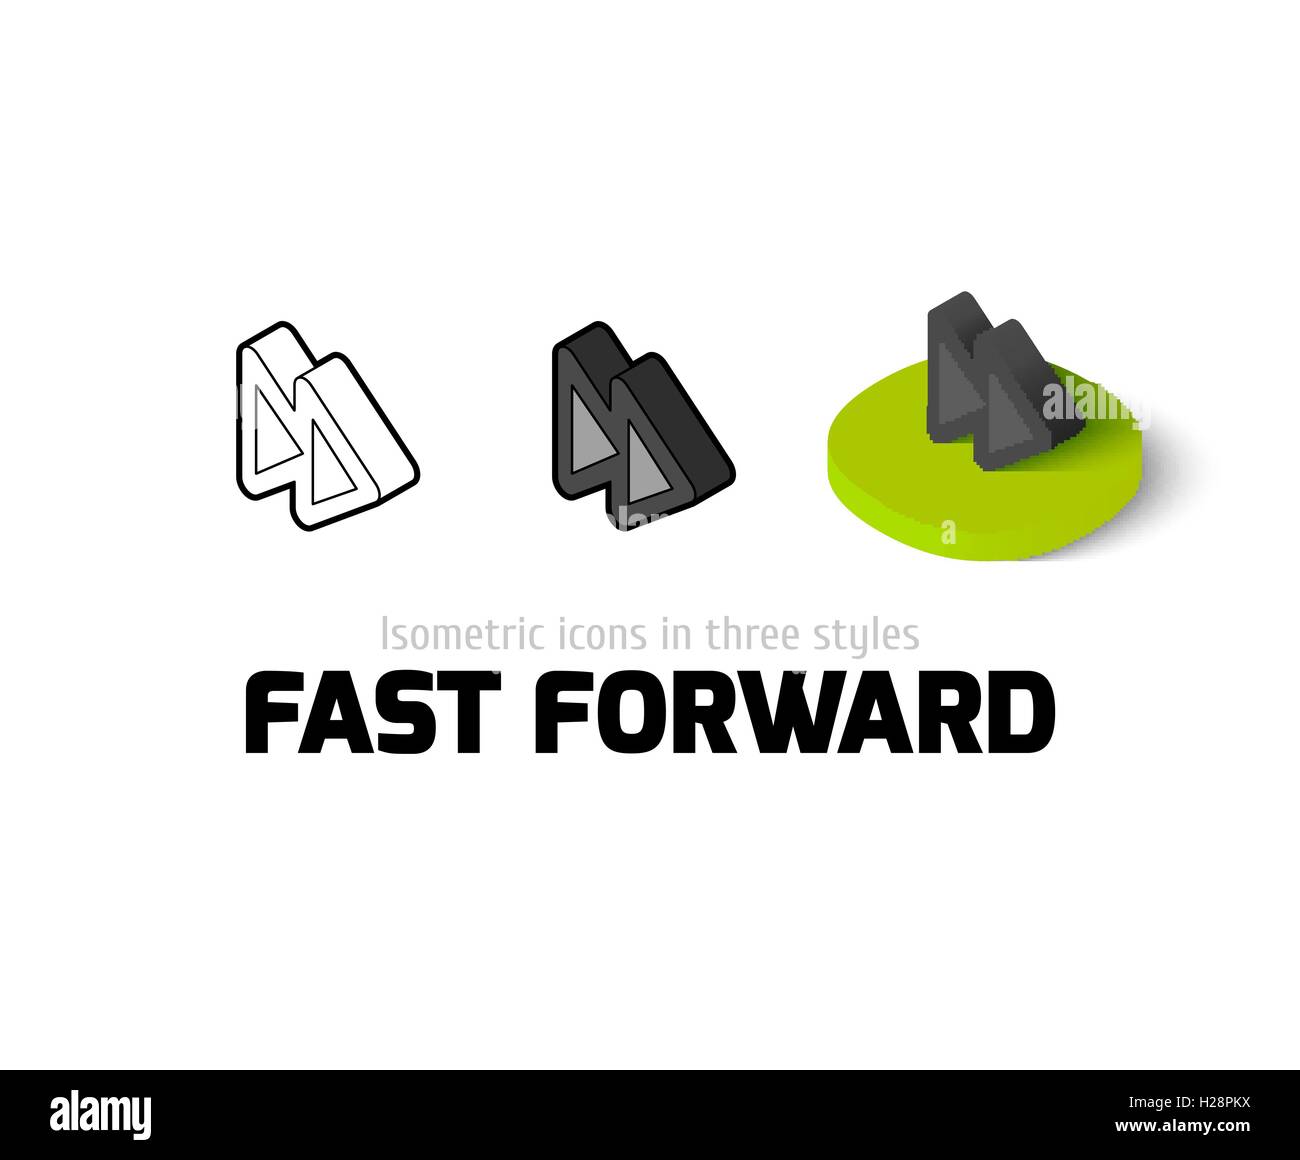 Fast forward icon in different style Stock Vector